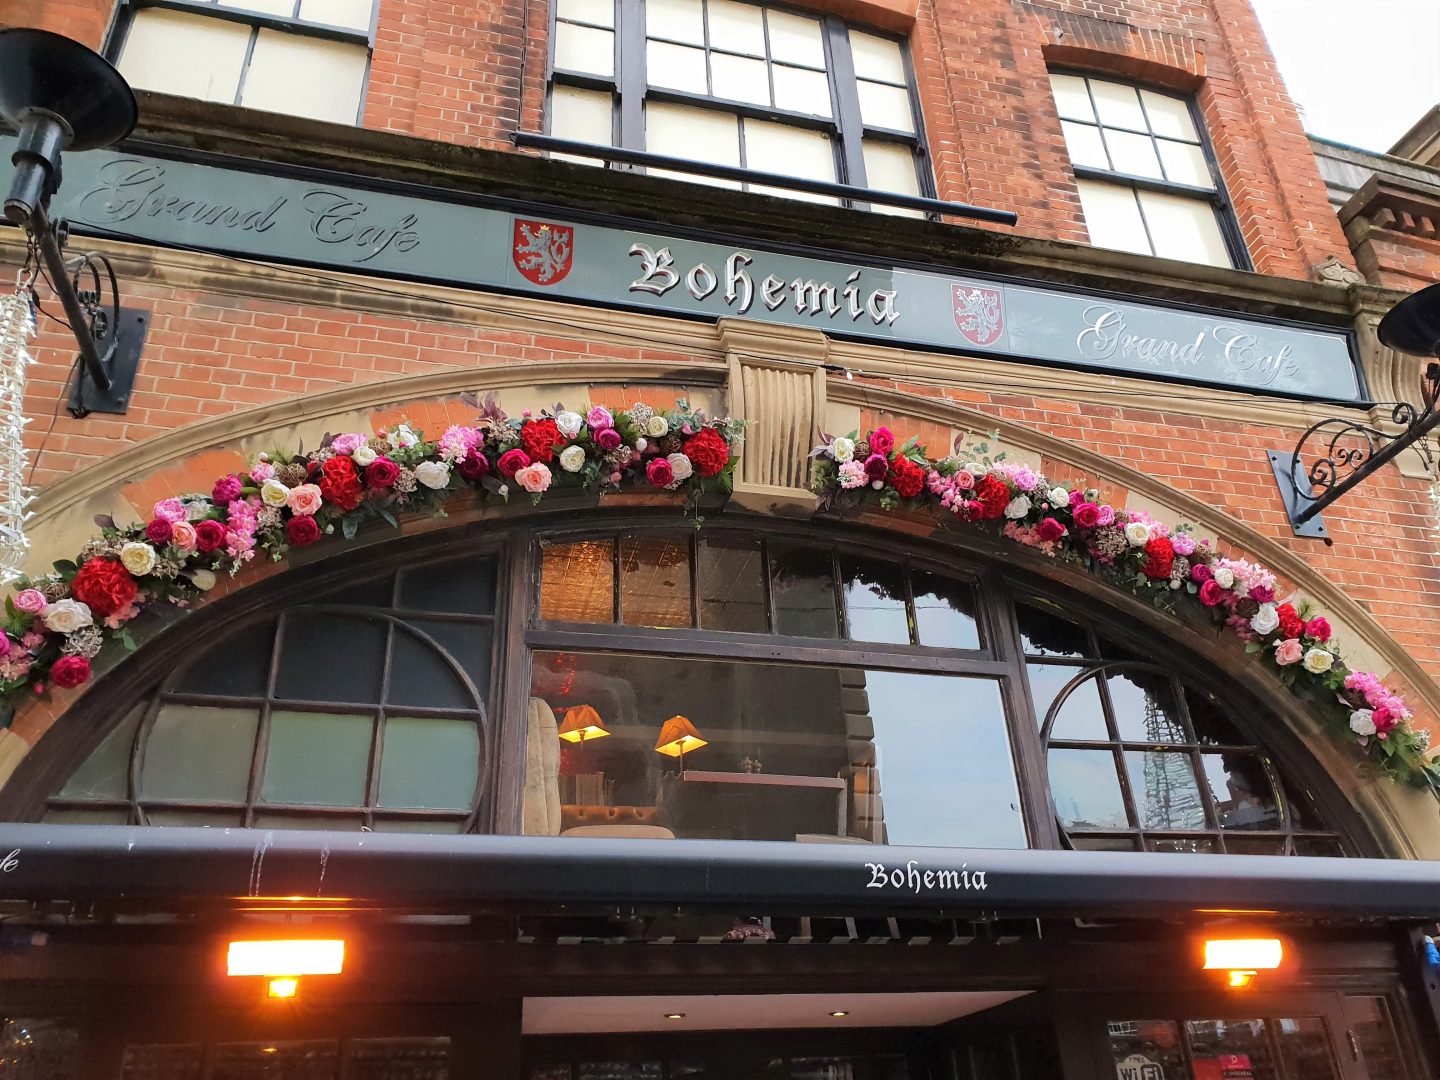 Frontage of Bohemia Brighton, adorned with flowers on the arch stonework